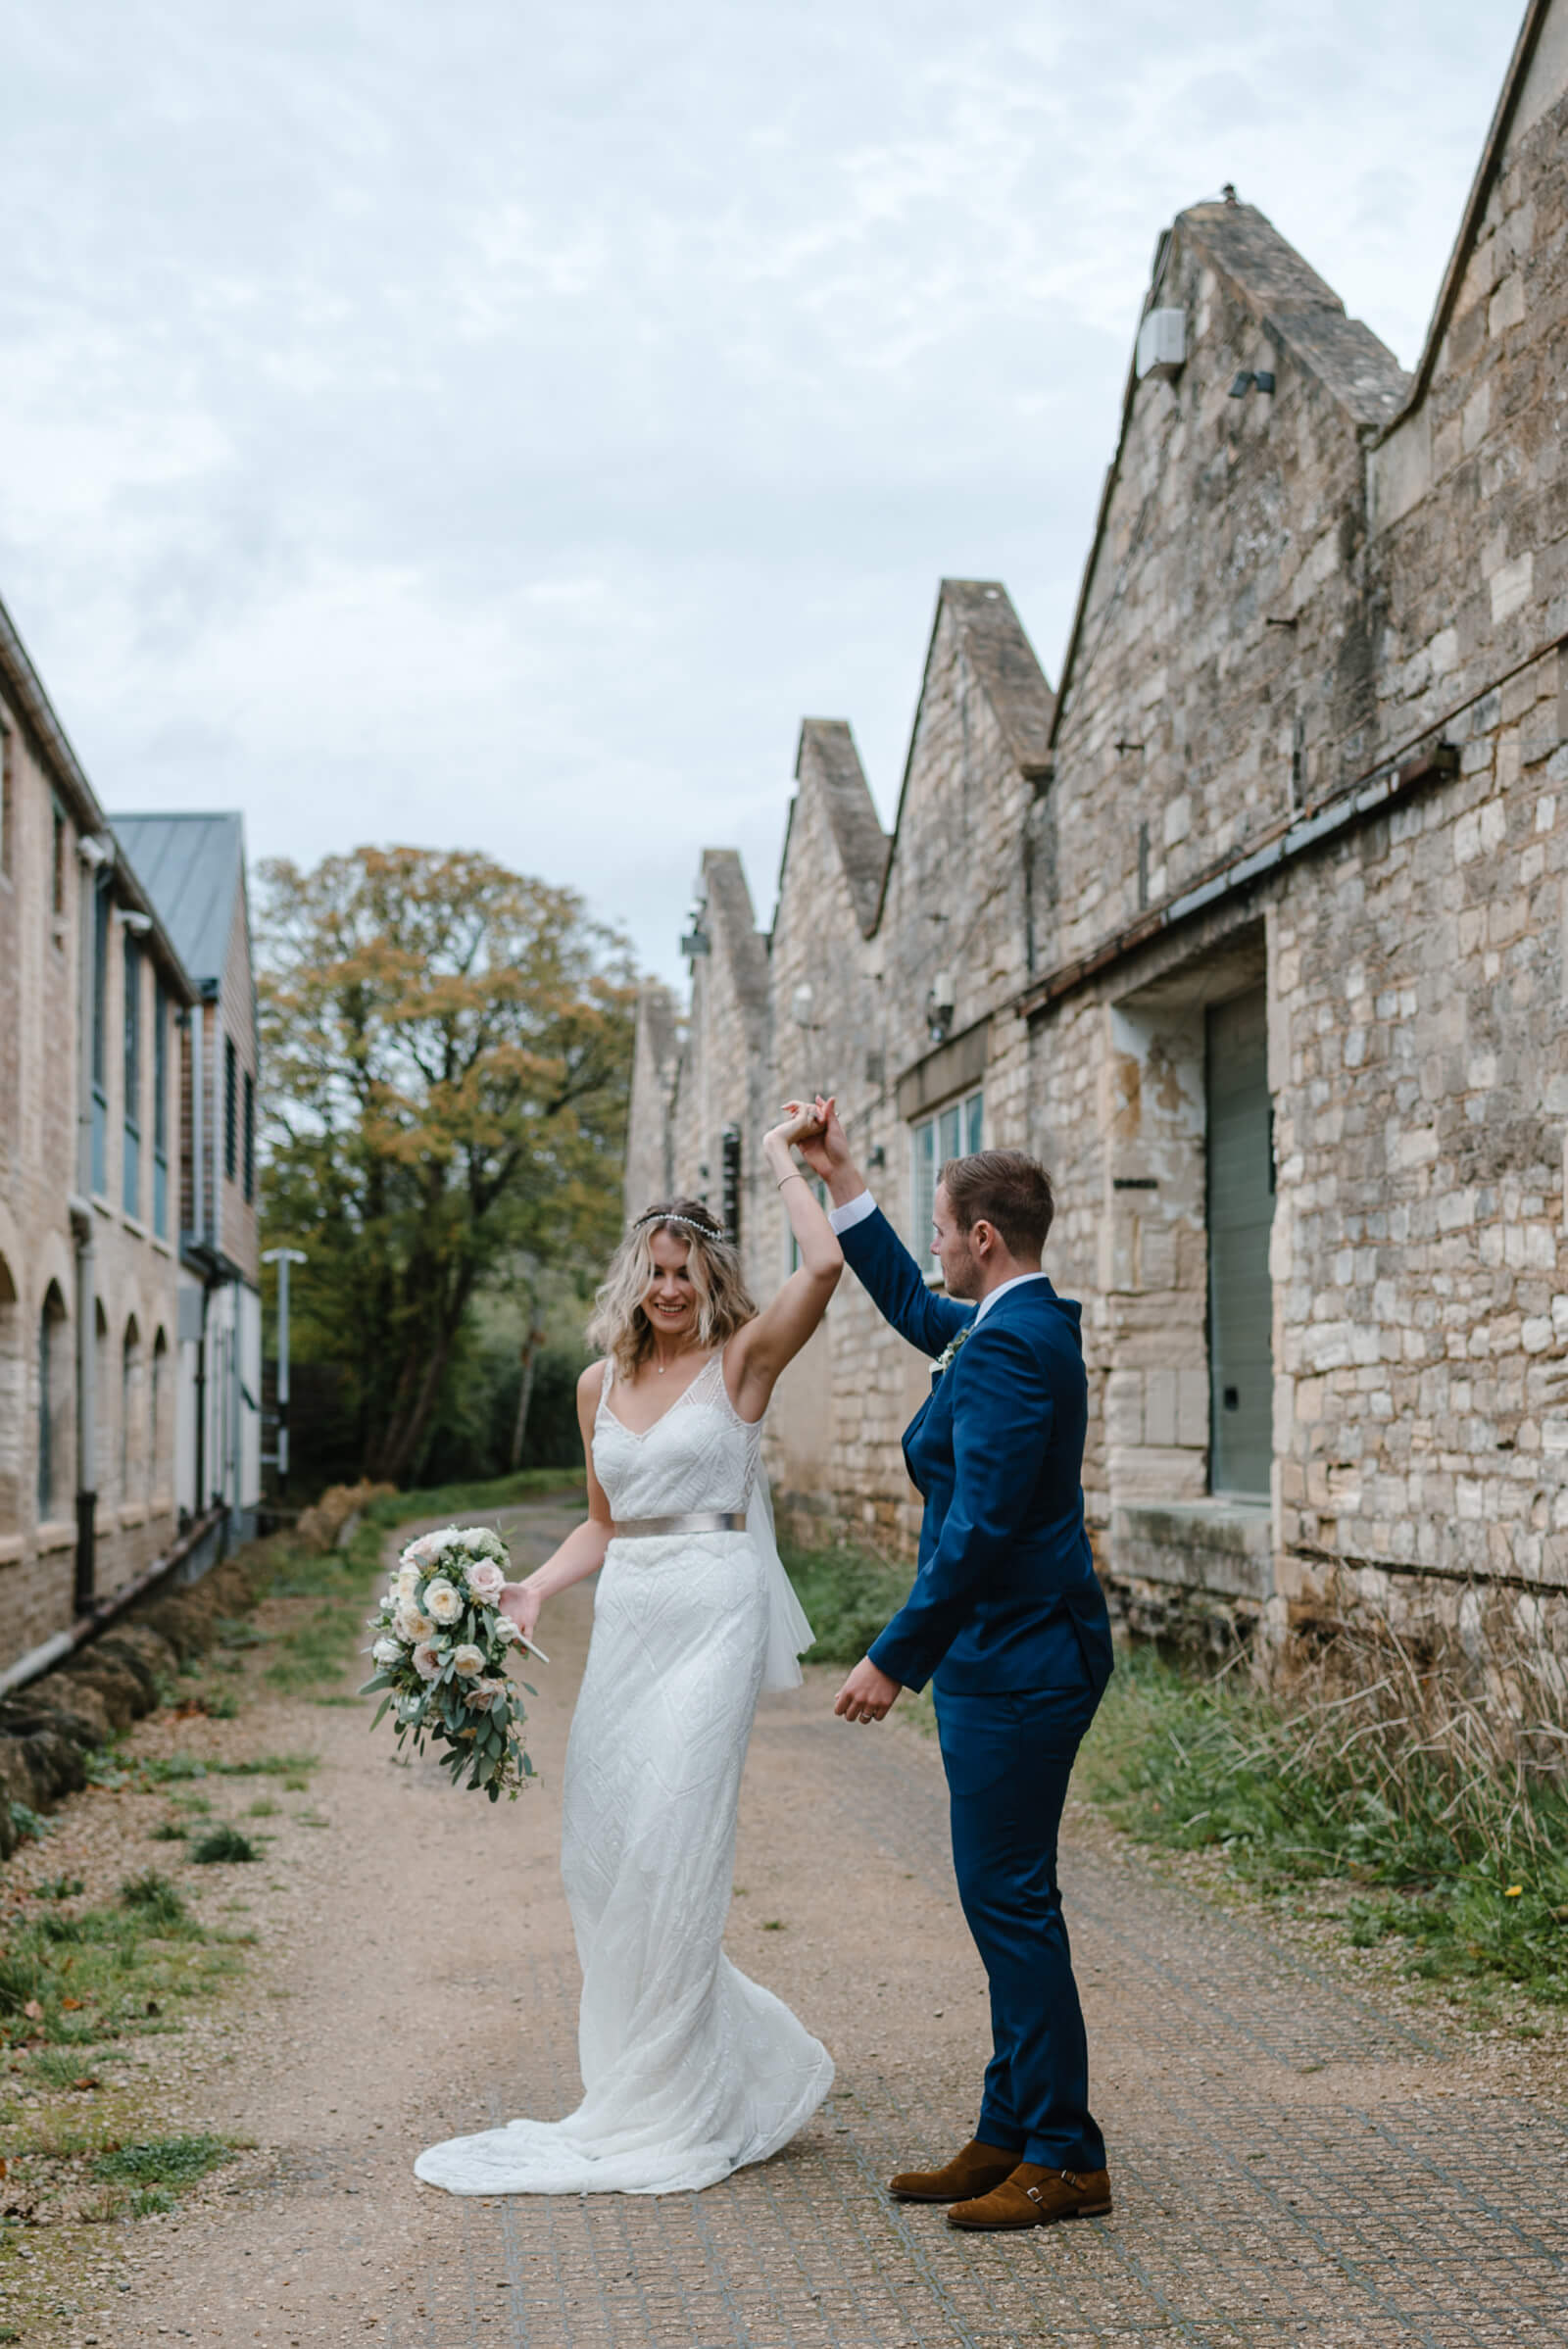 Bride and groom practicing their first dance for their Wiltshire wedding at Glove Factory Studios